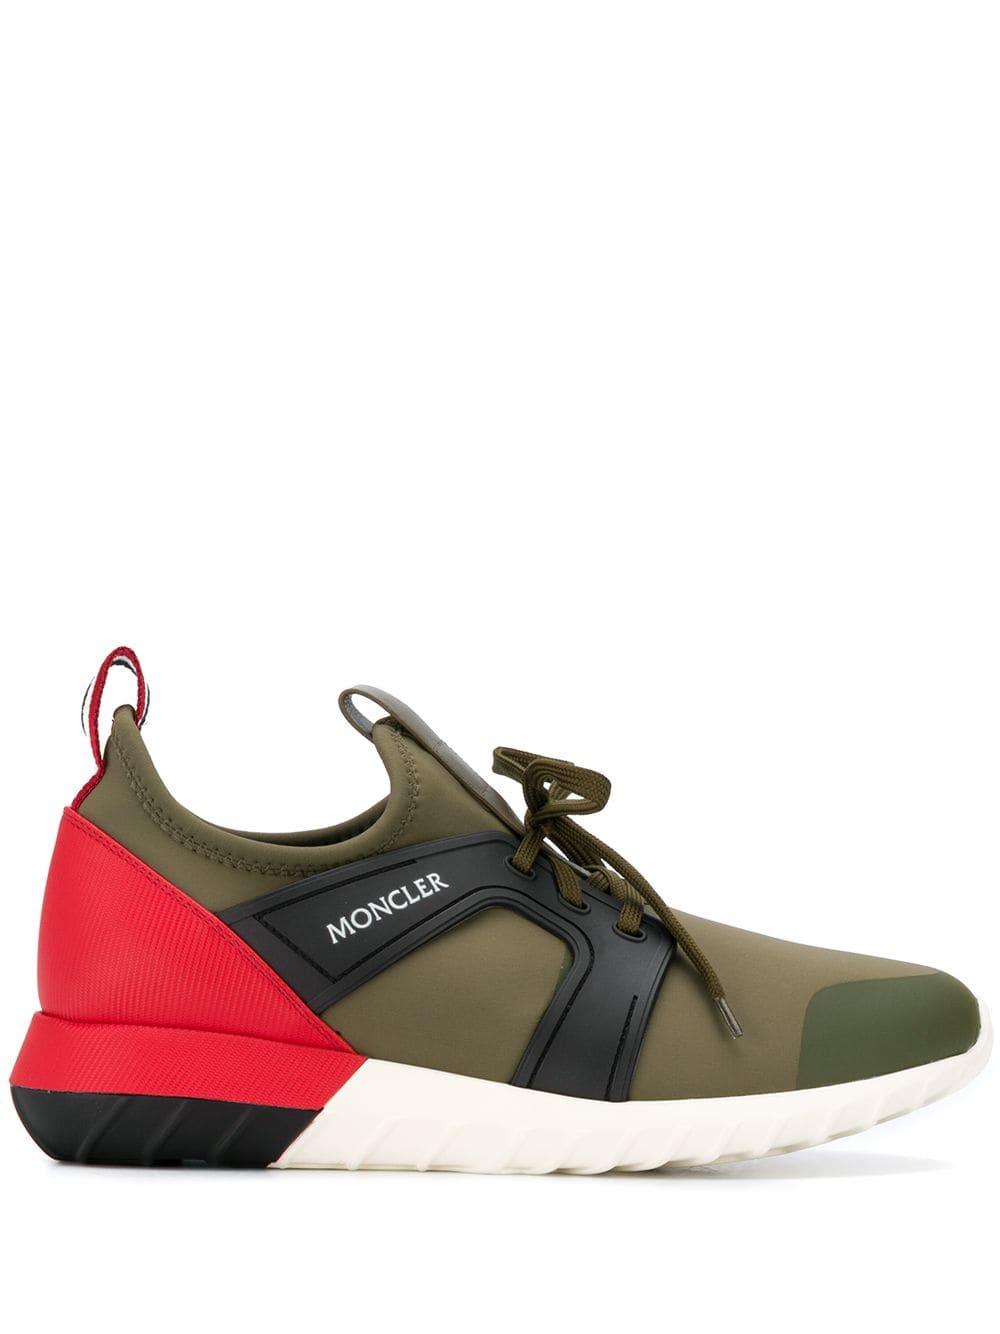 Moncler Leather Emilien Sneakers in Green for Men - Lyst